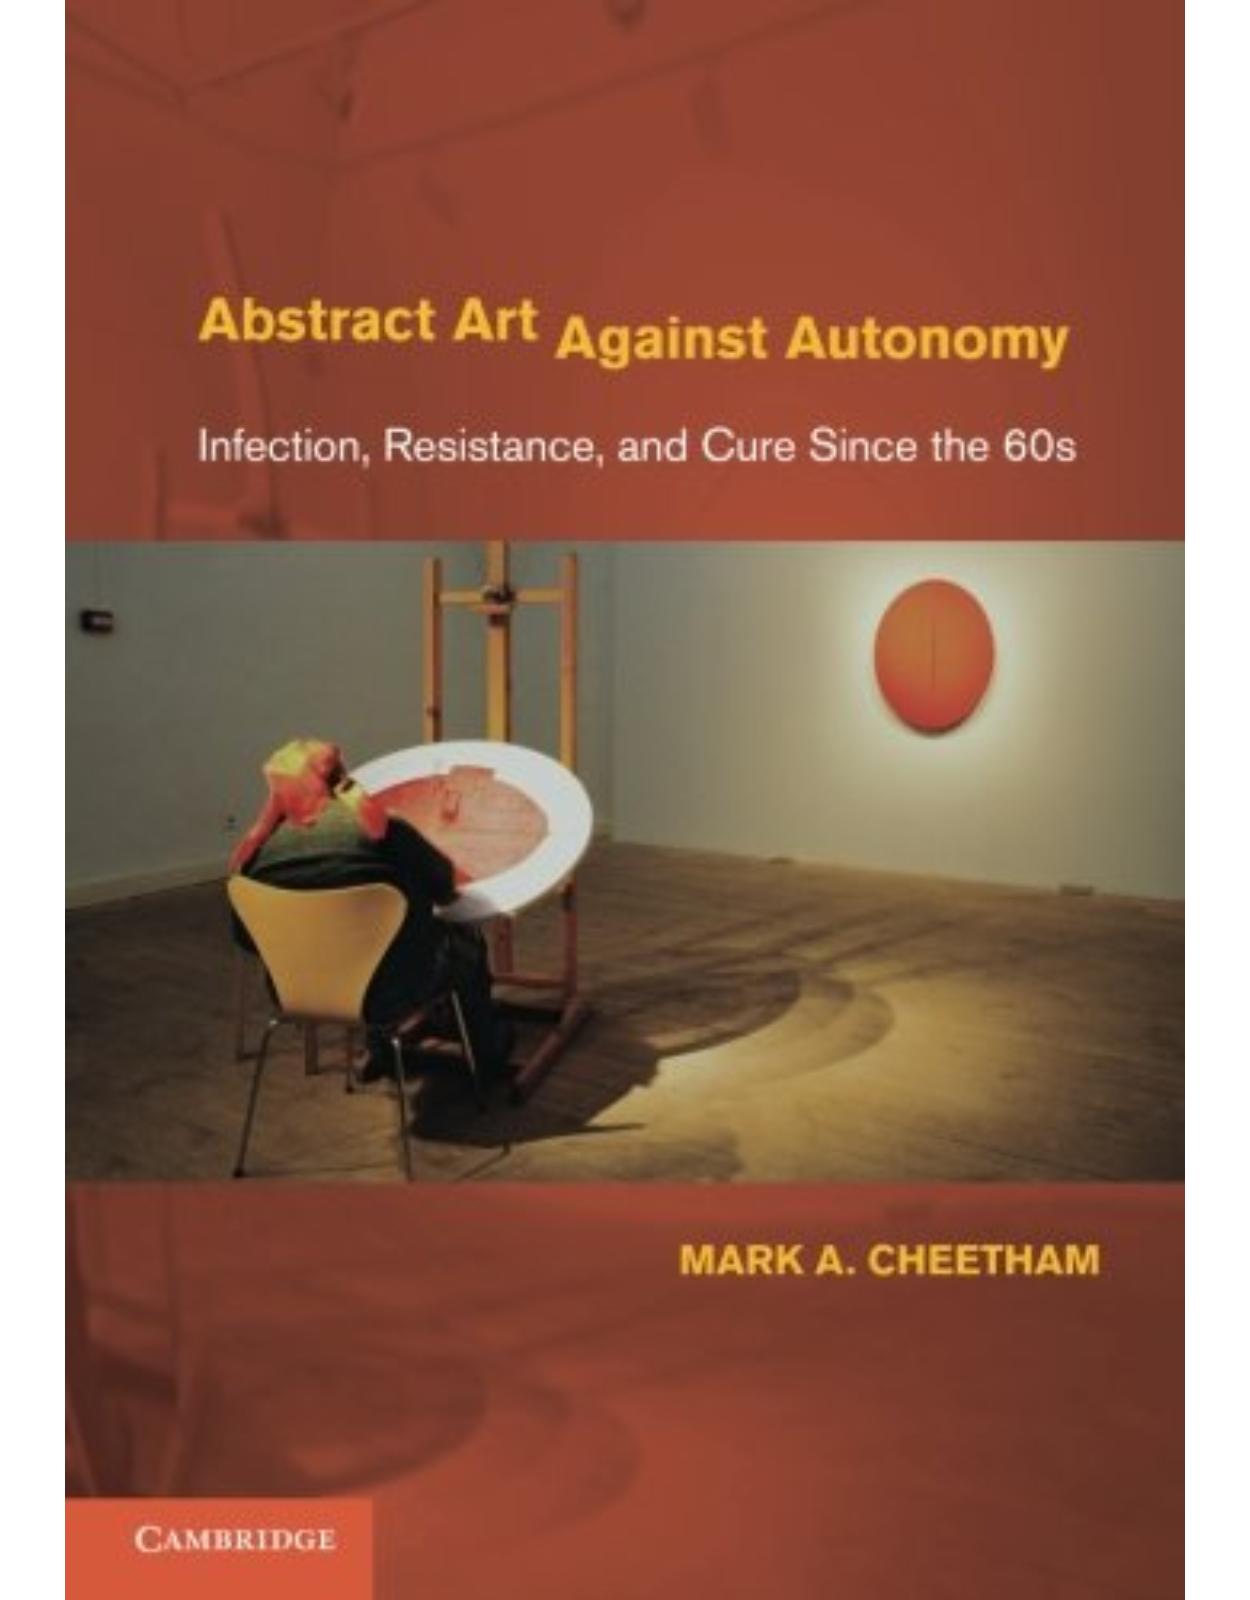 Abstract Art Against Autonomy: Infection, Resistance, and Cure since the 60s